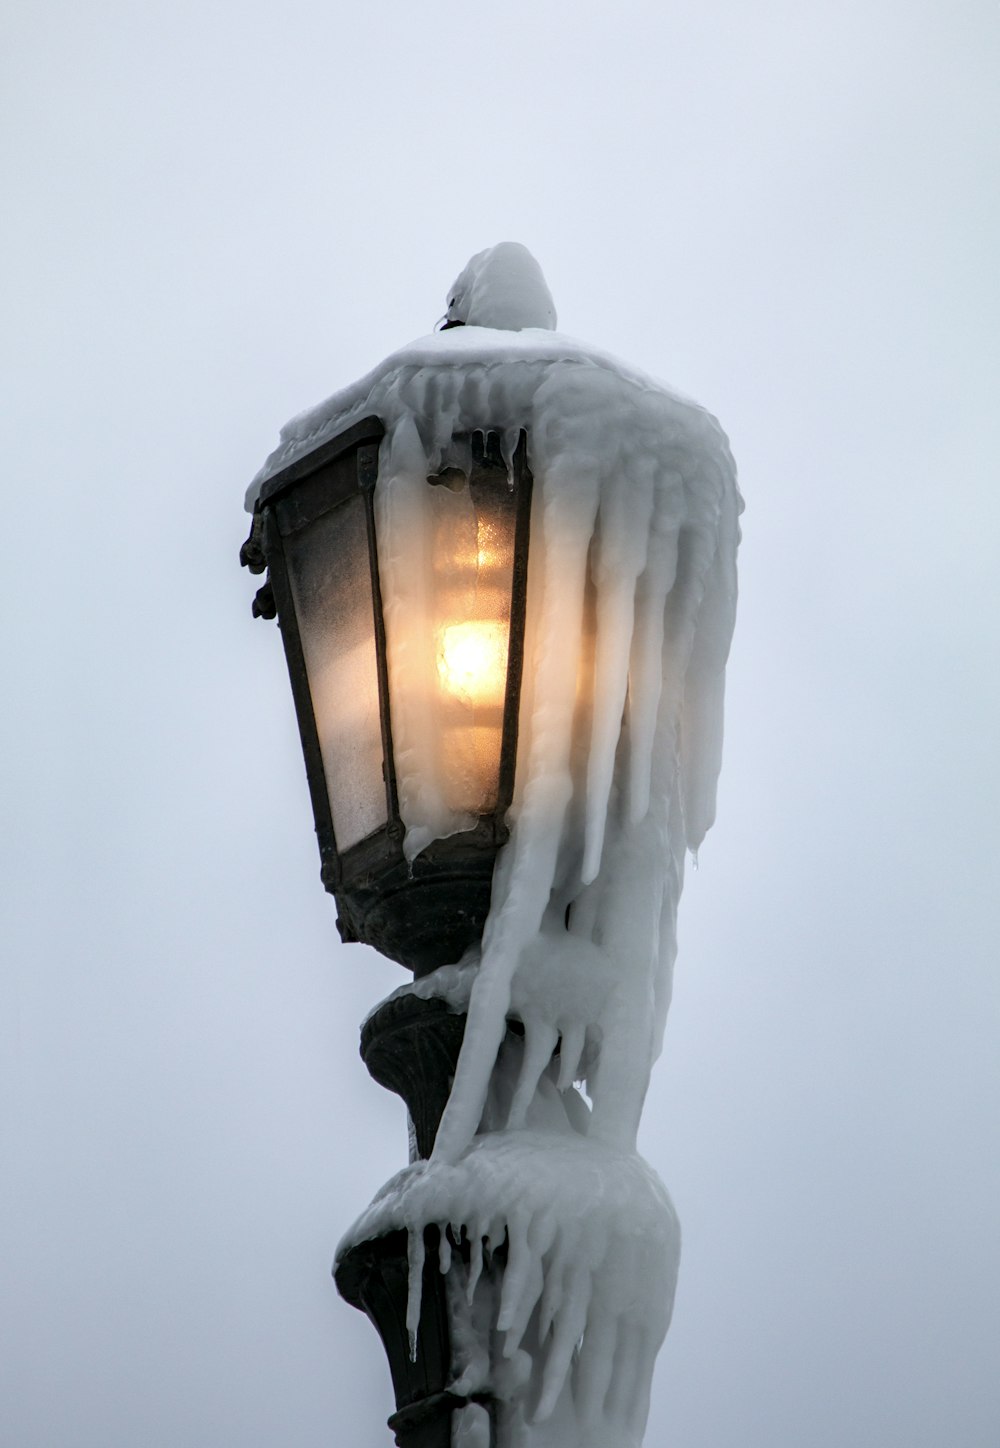 snow covered turned on street lamp